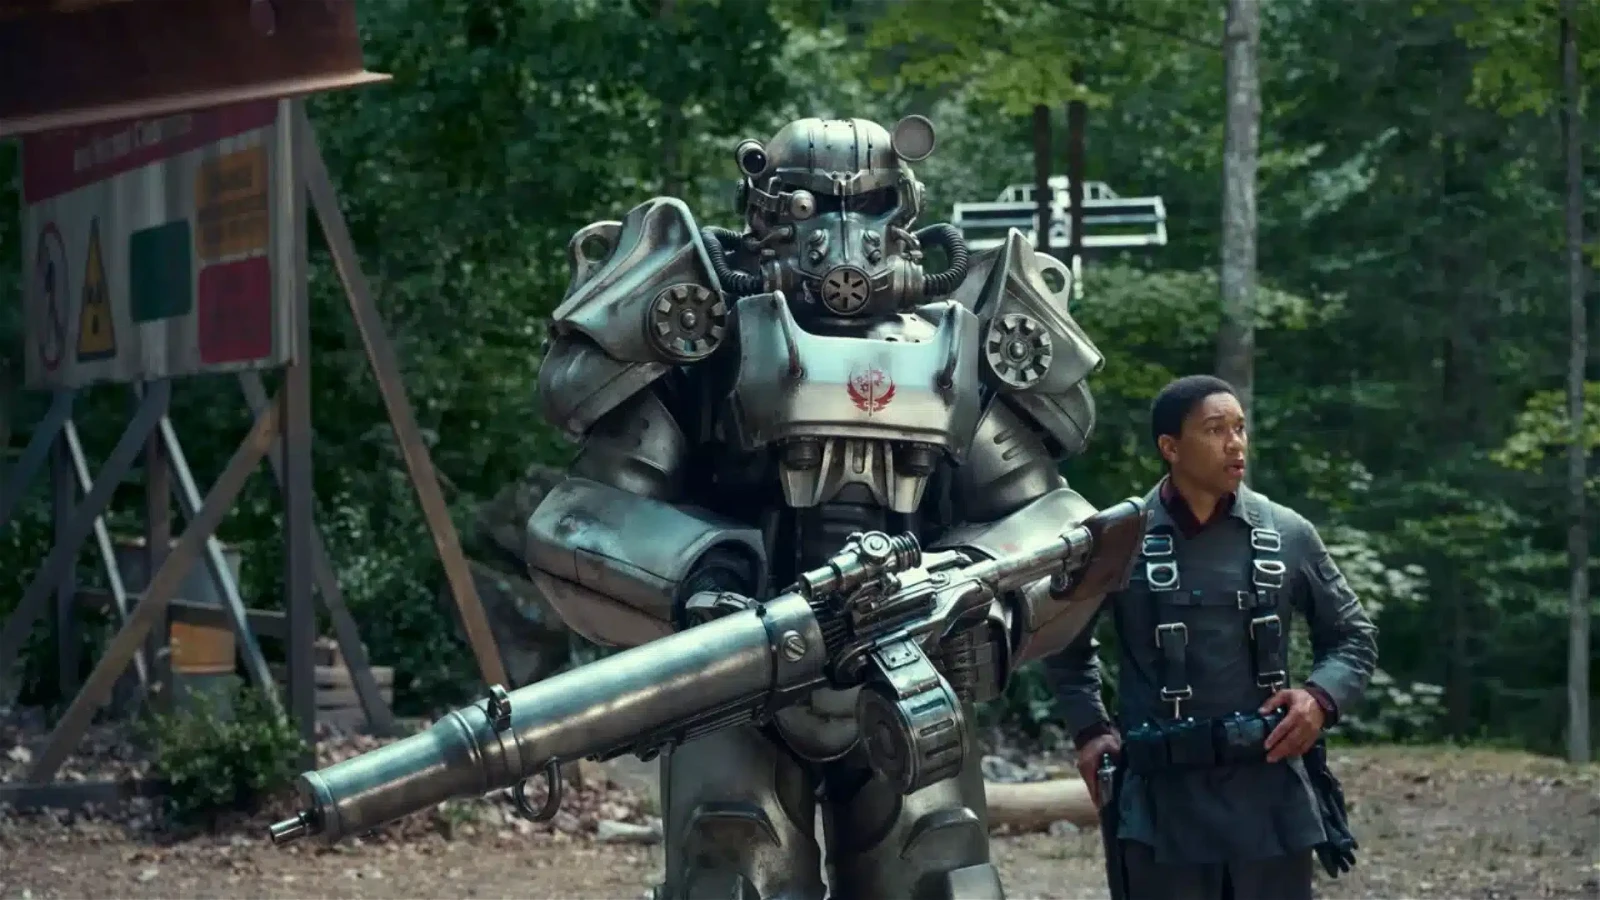 A still from the upcoming Fallout TV show. Image credit: Amazon